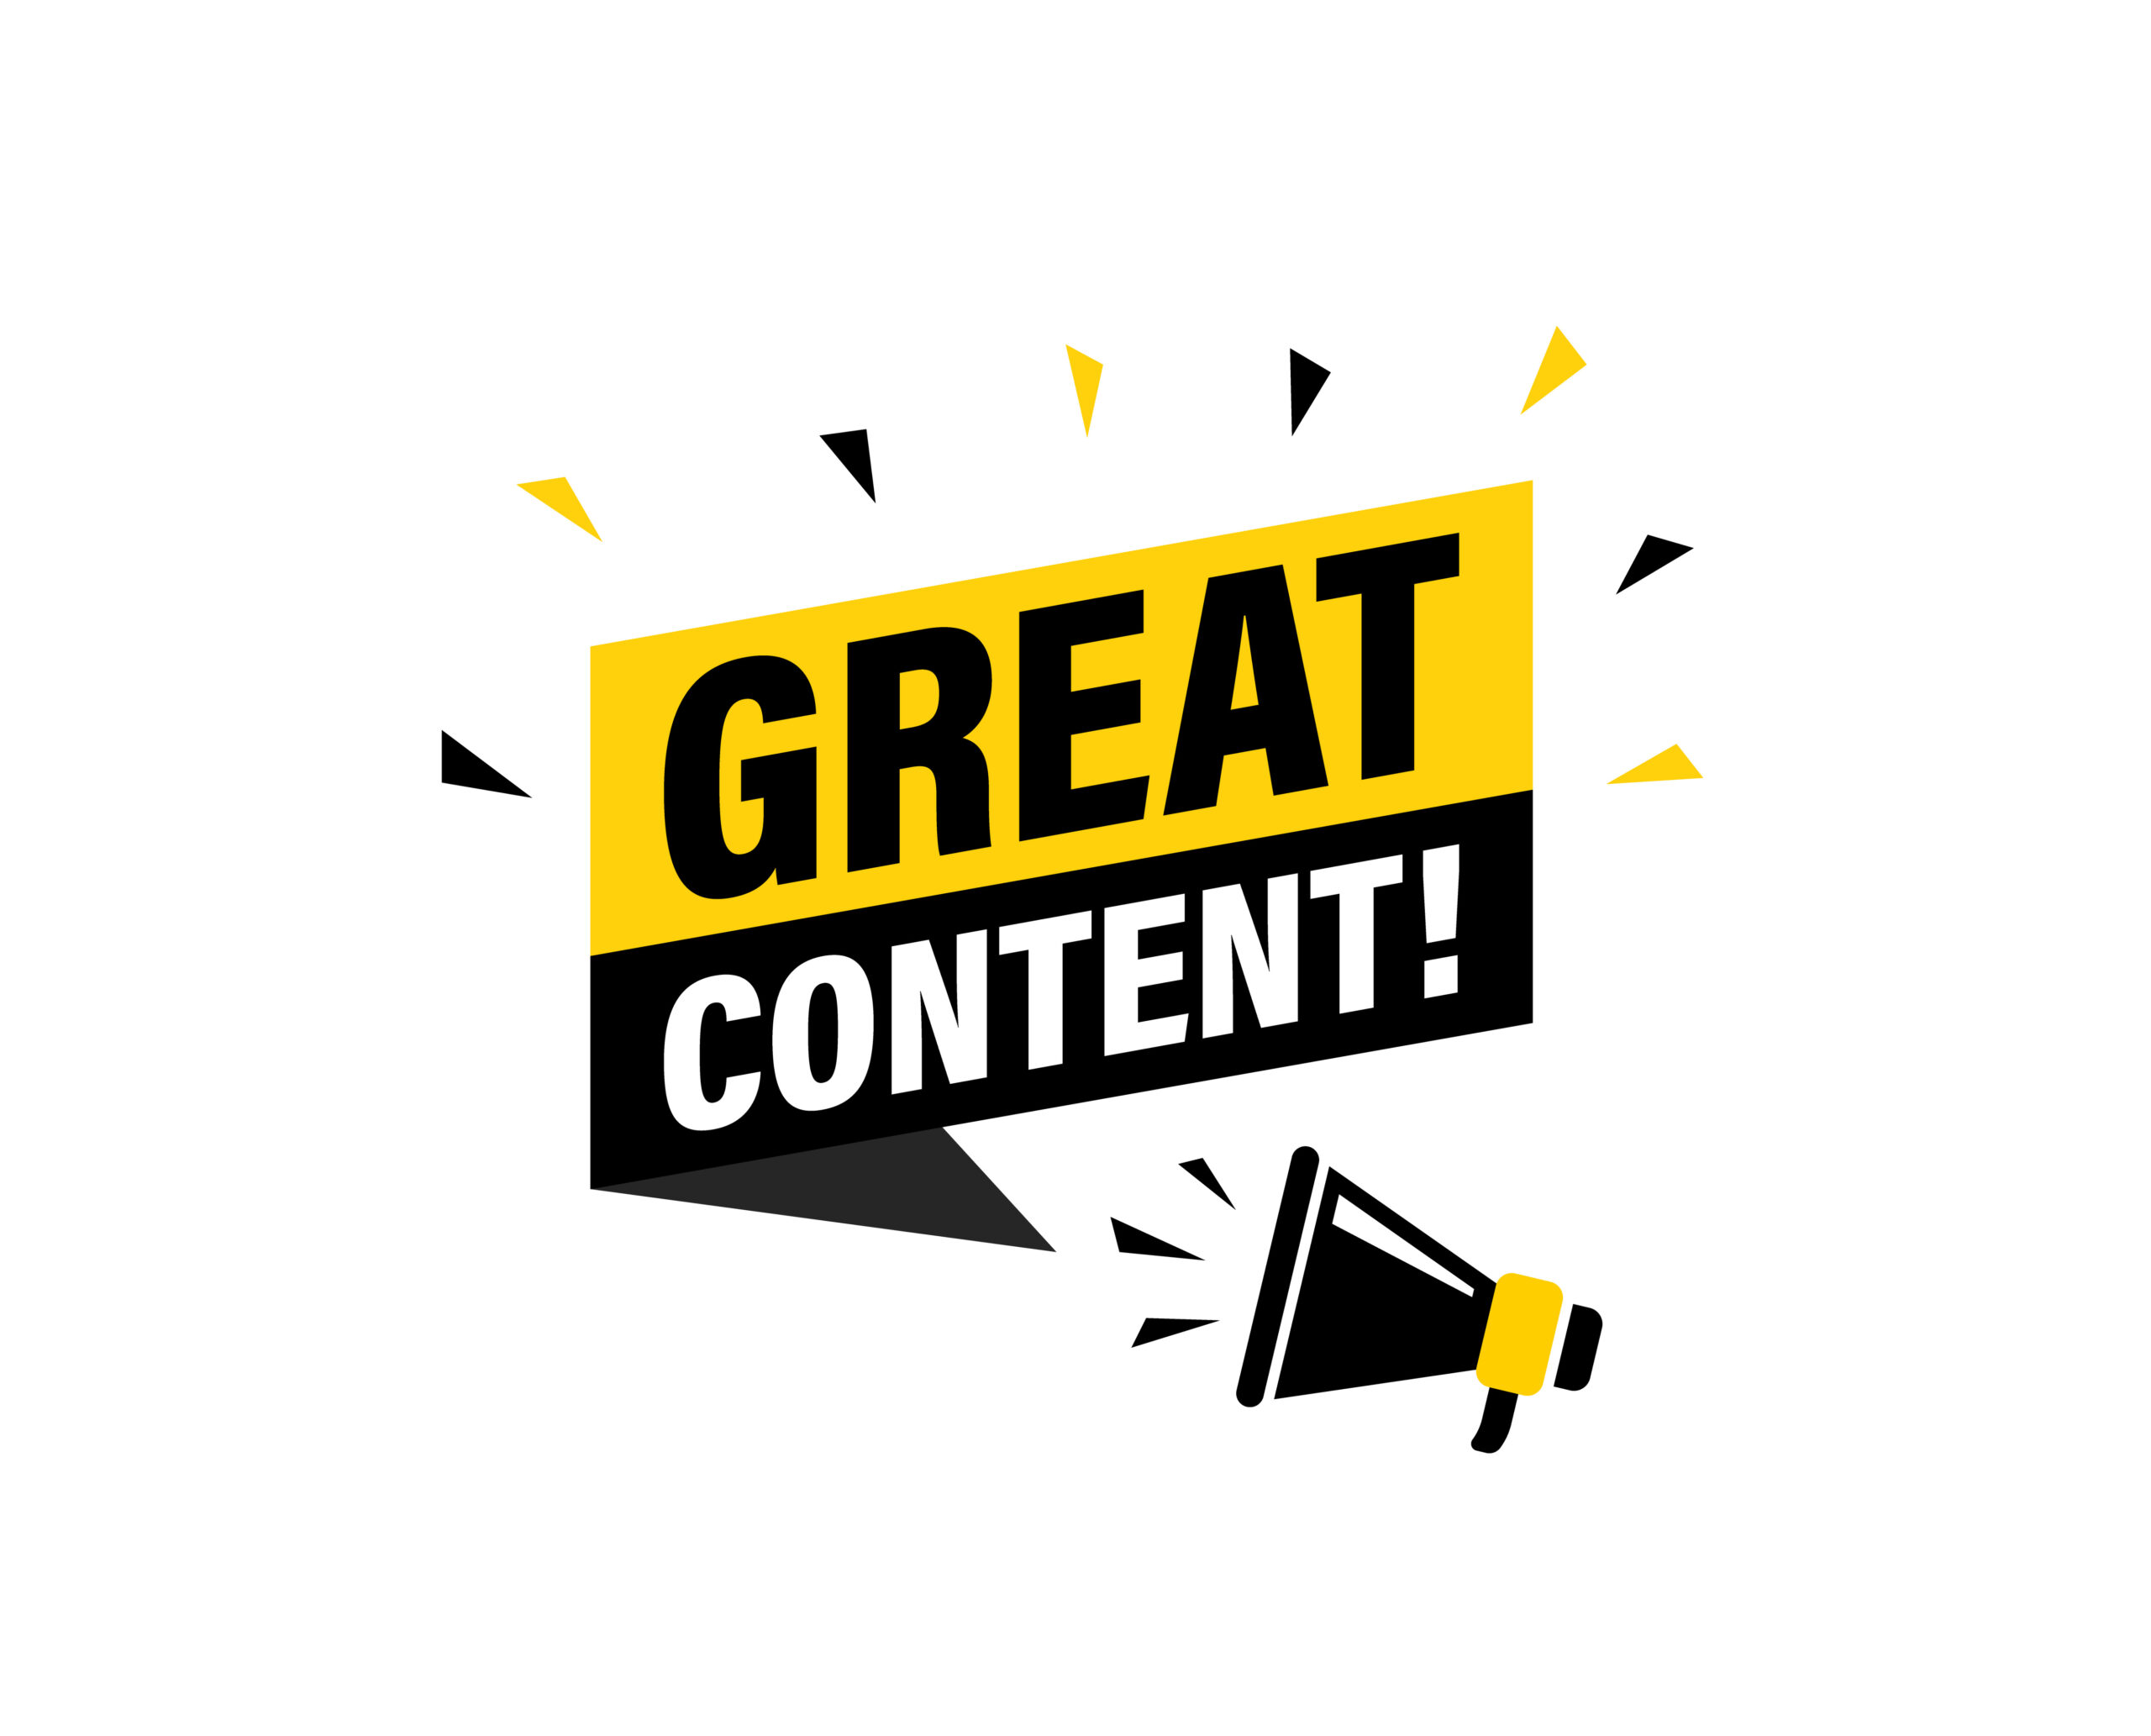 Greatcontent and Eurocom Translation Services: There's no Easier Way to Global Content